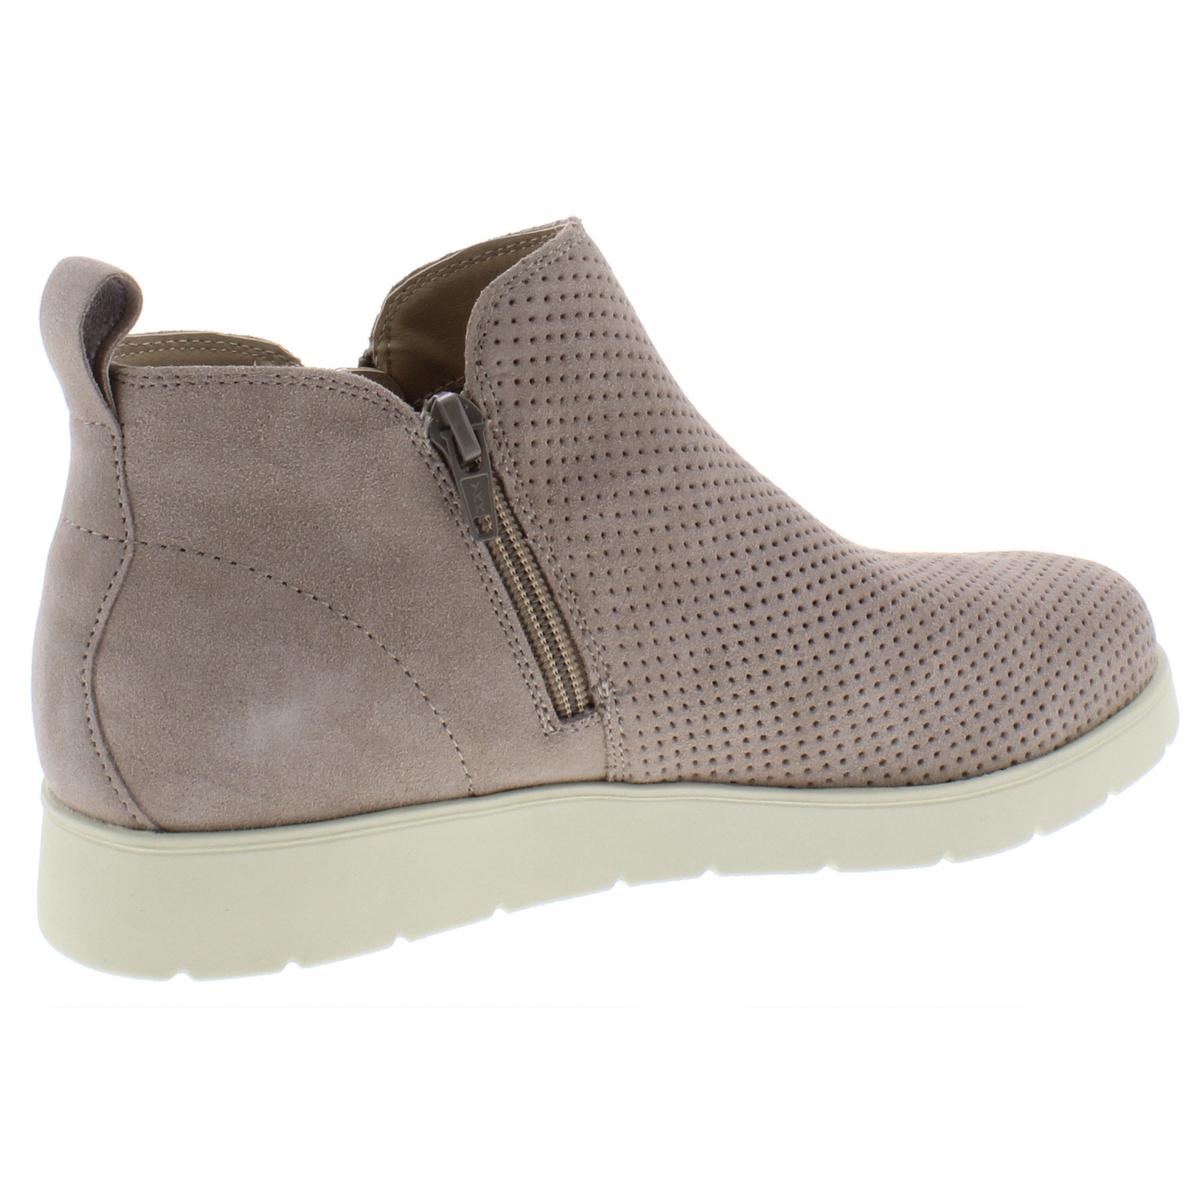 White Mountain Womens Beaumont Suede Perforated Casual Boots Shoes BHFO ...